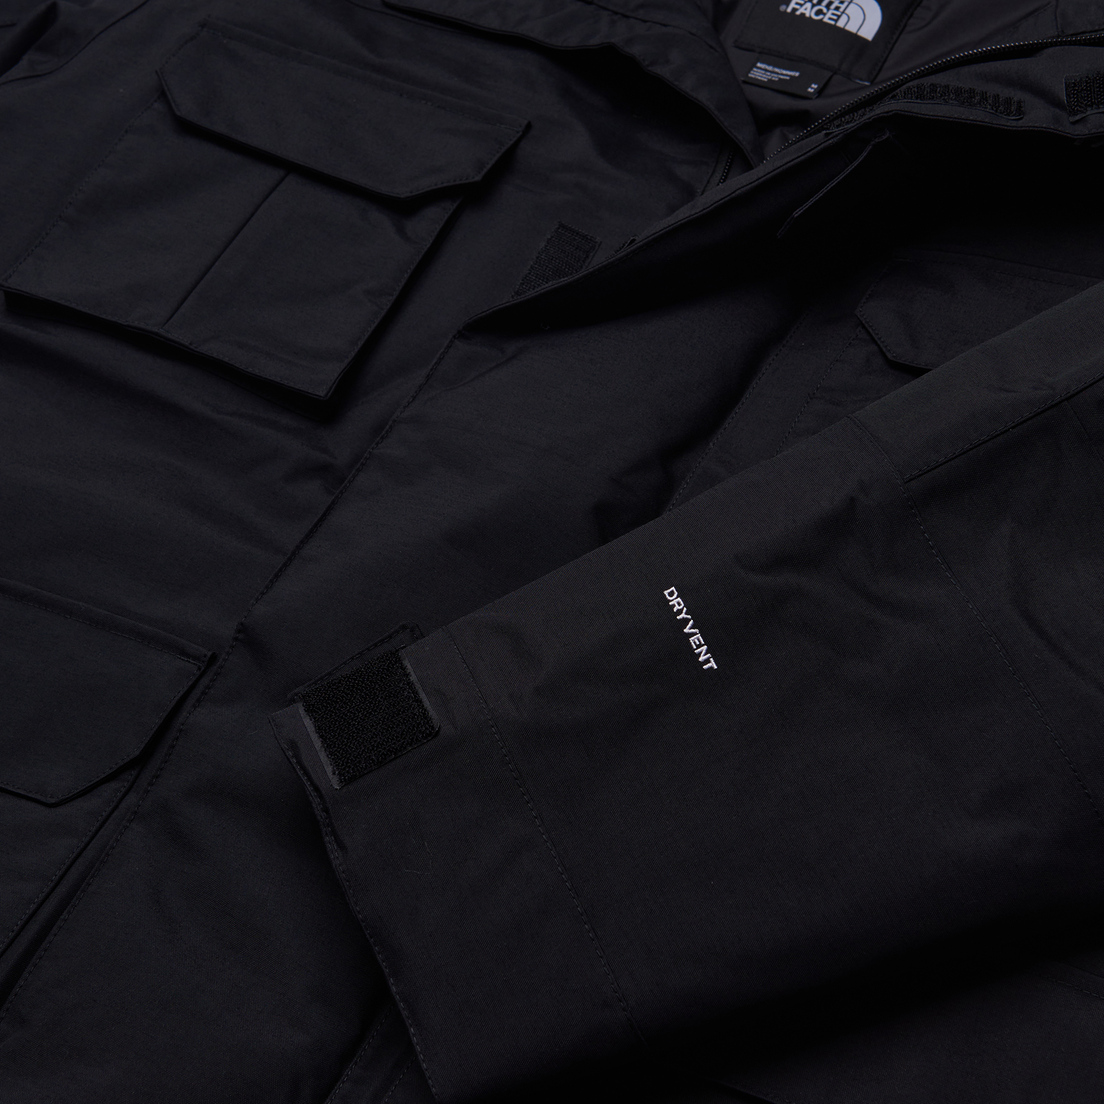 The North Face Мужская куртка парка Coldworks Insulated